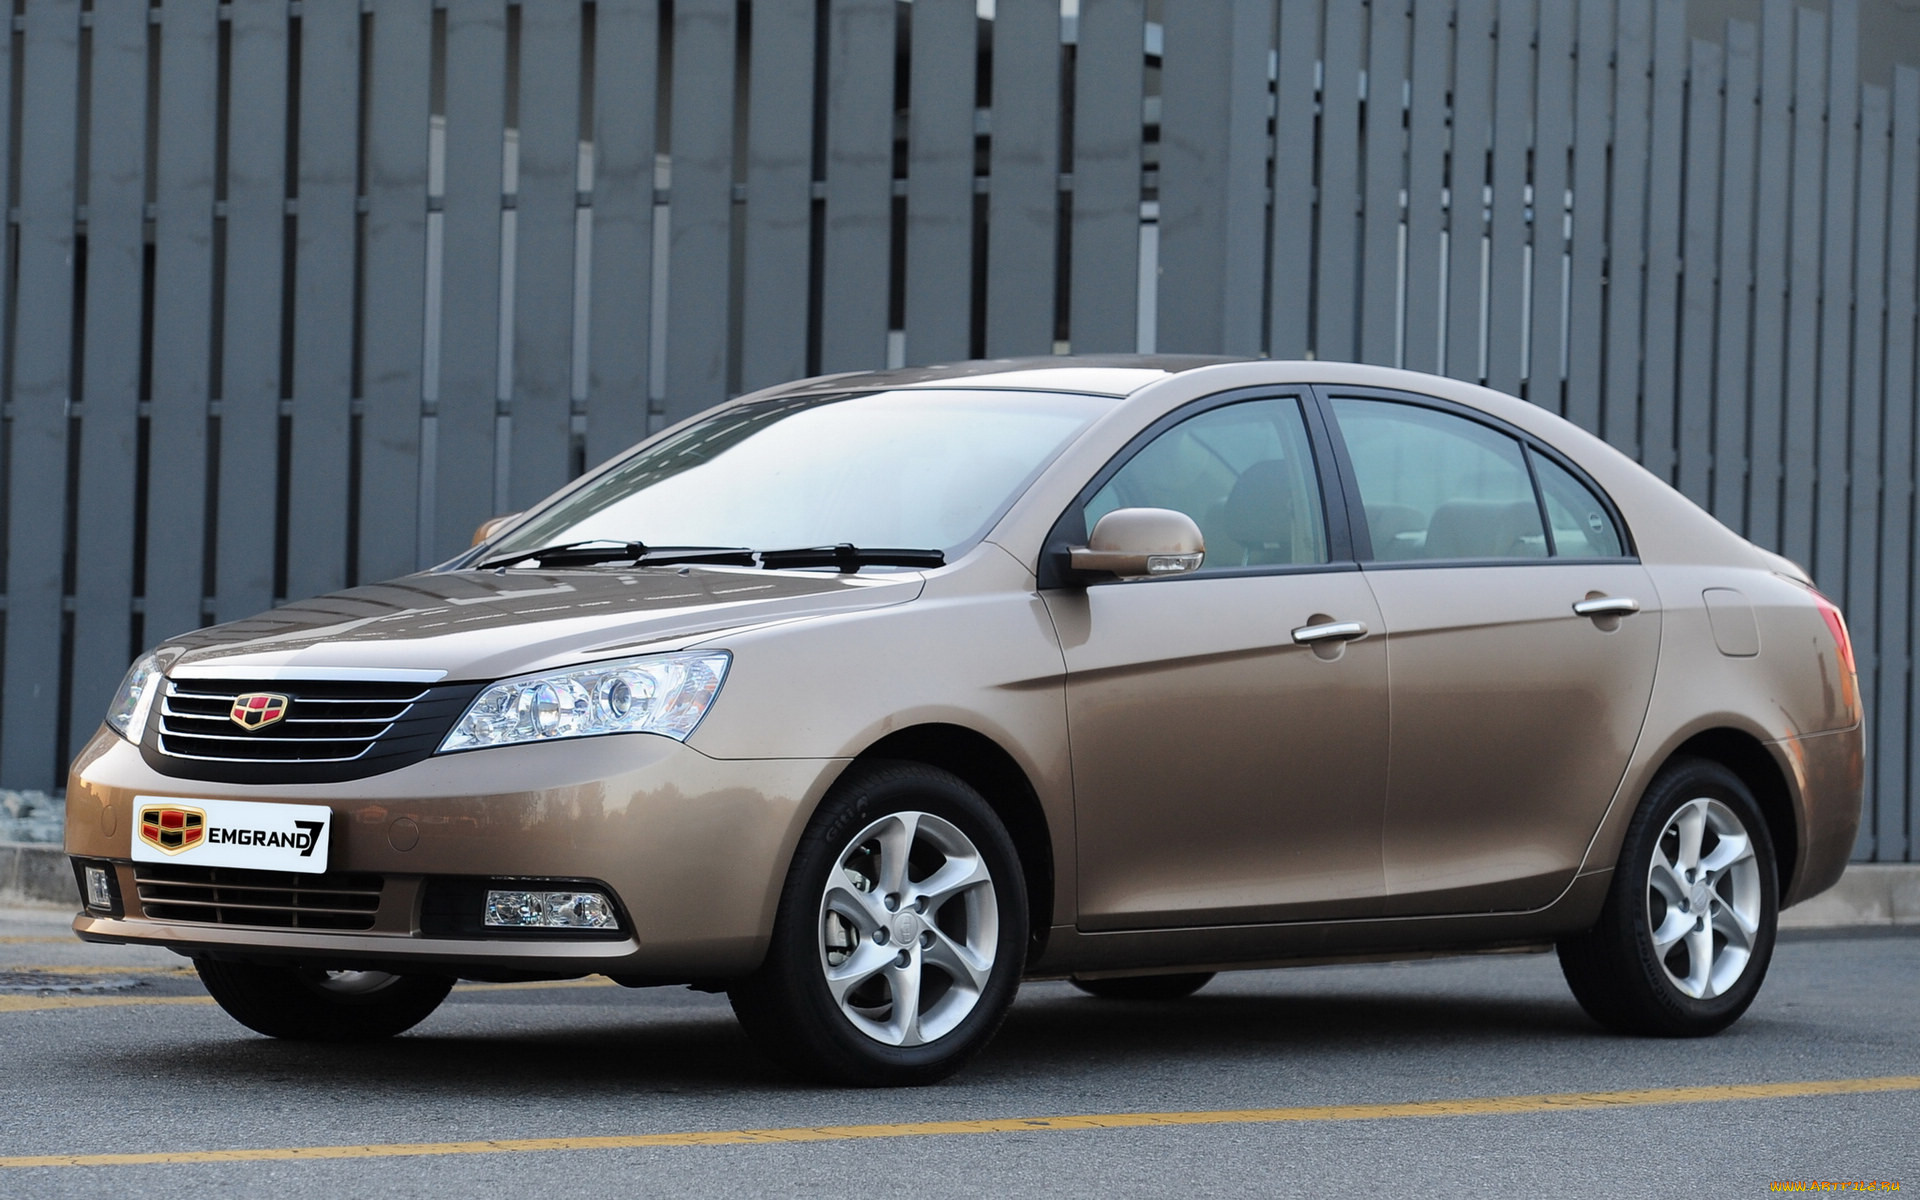 Geely emgrand luxury. Geely Emgrand ec7. Jelly Emerald ec7. Gappy Emgrand ec7. Geely Emgrand ес7.